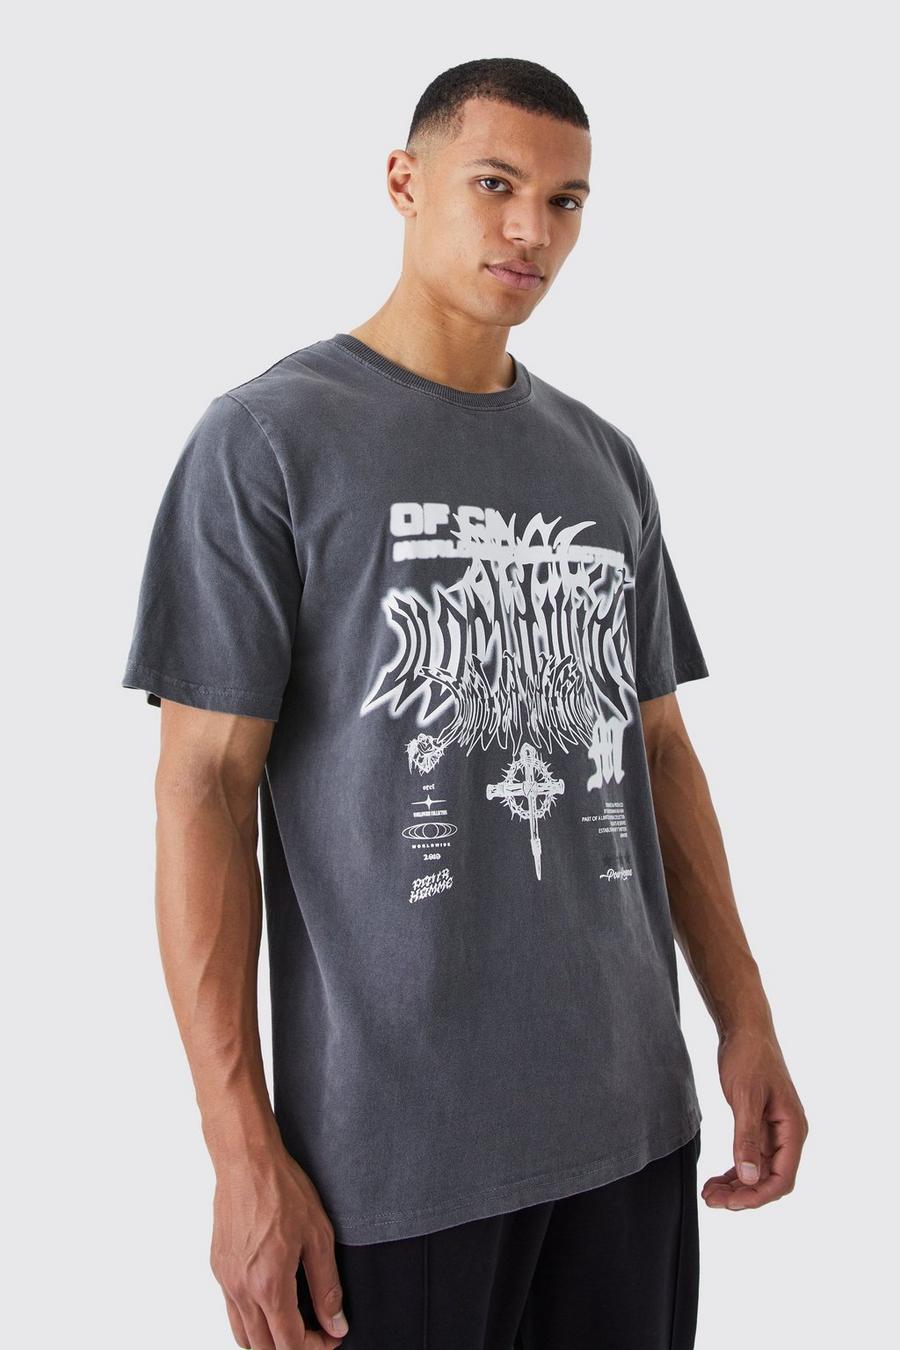 Charcoal grey Tall Oversized Overdyed Gothic Graphic T-shirt